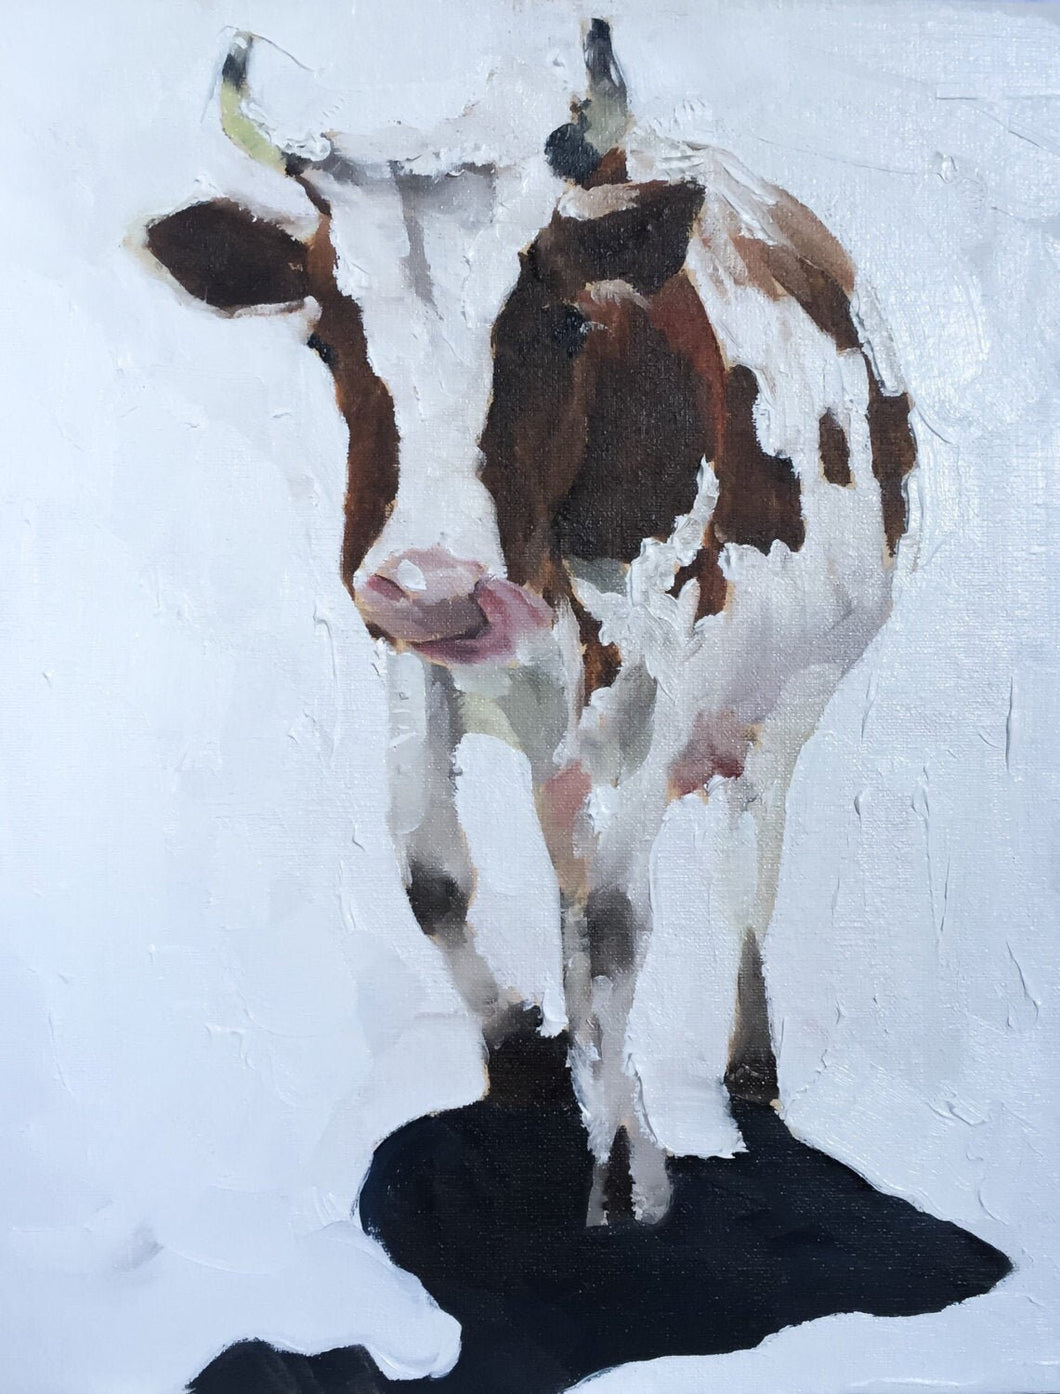 Cow Painting, Prints, Canvas, Posters, Originals, Commissions, Fine Art - from original oil painting by James Coates